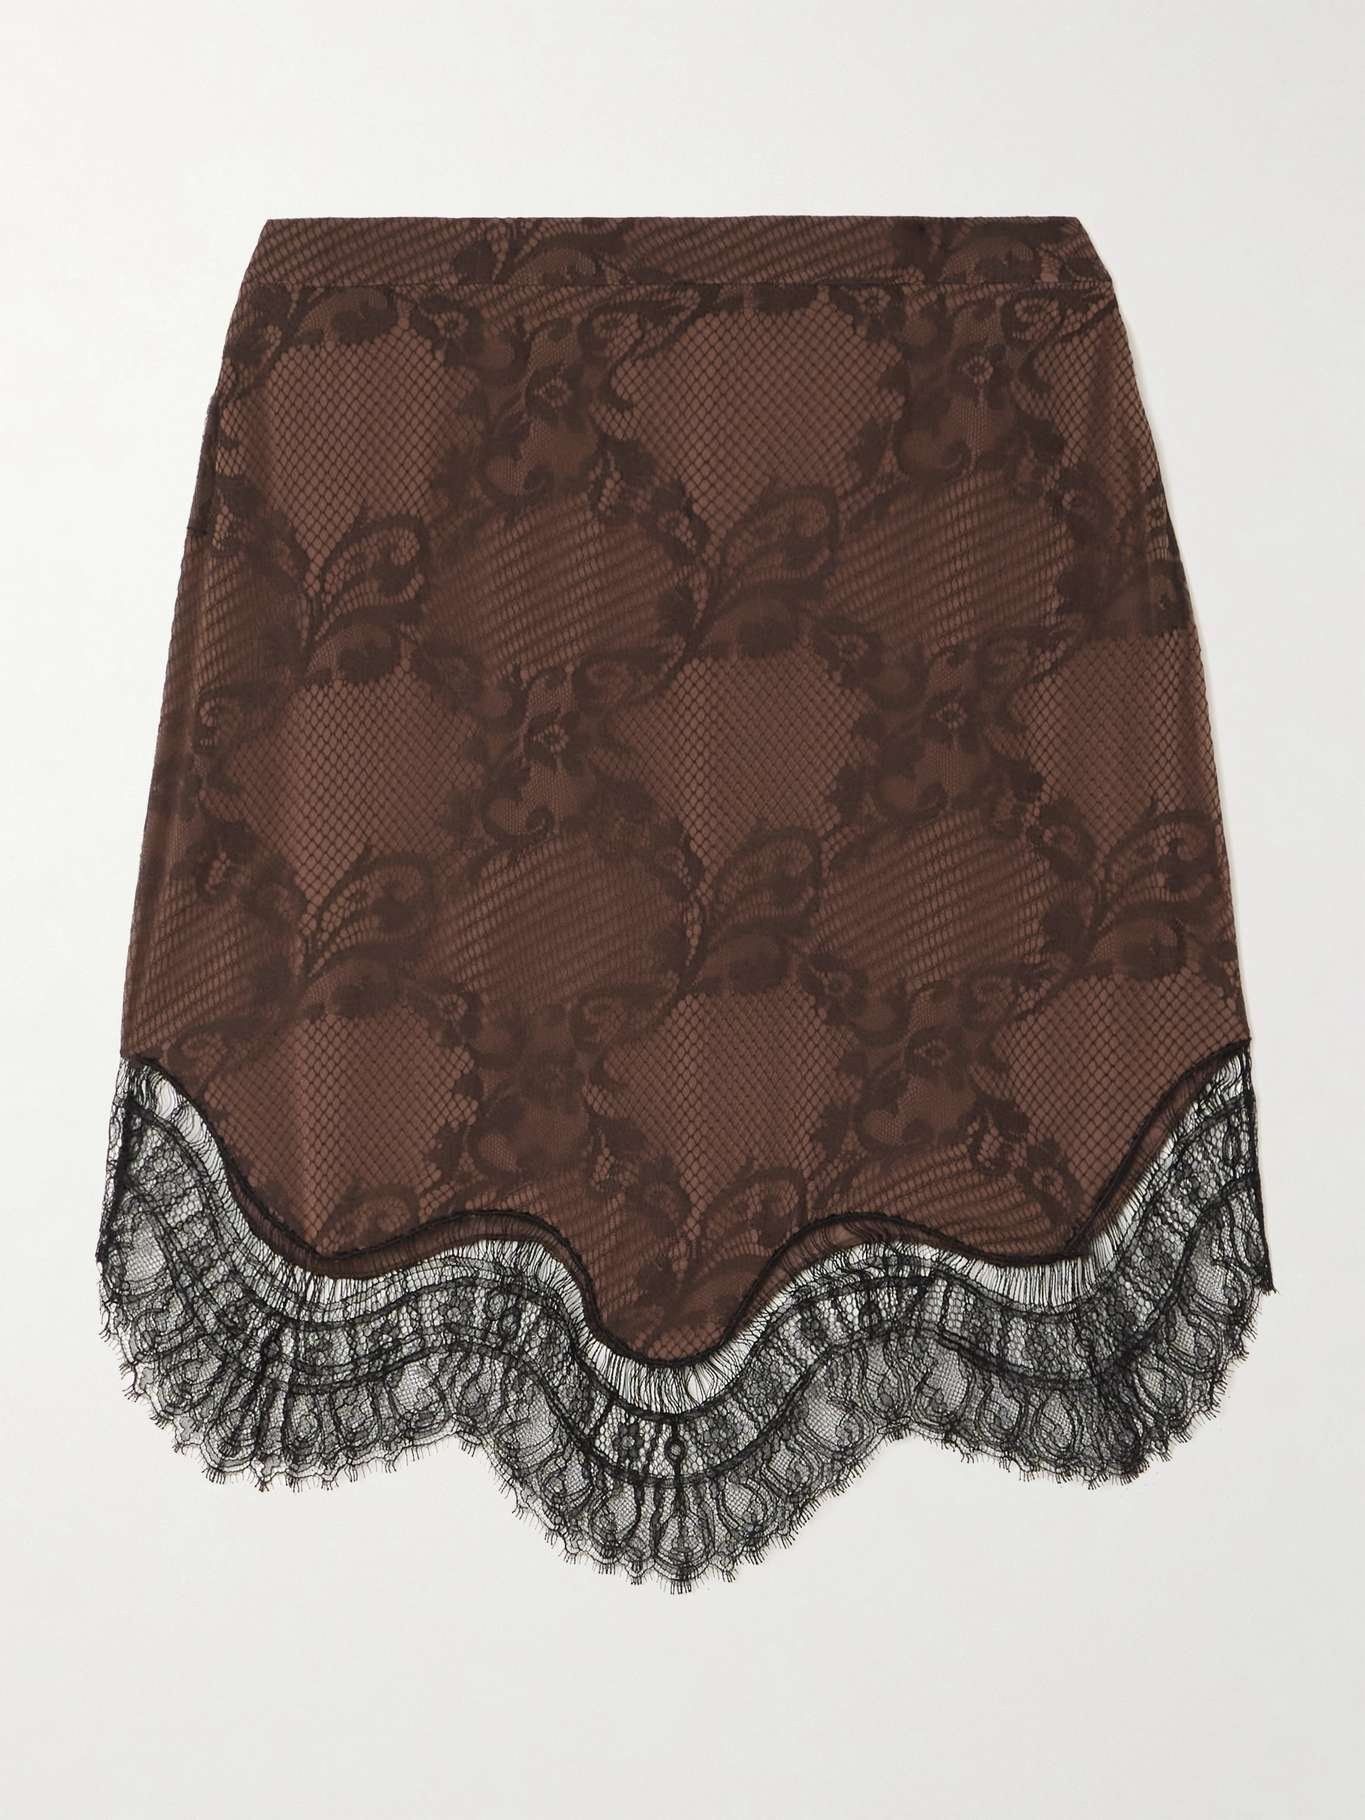 Satin and scalloped lace skirt - 1